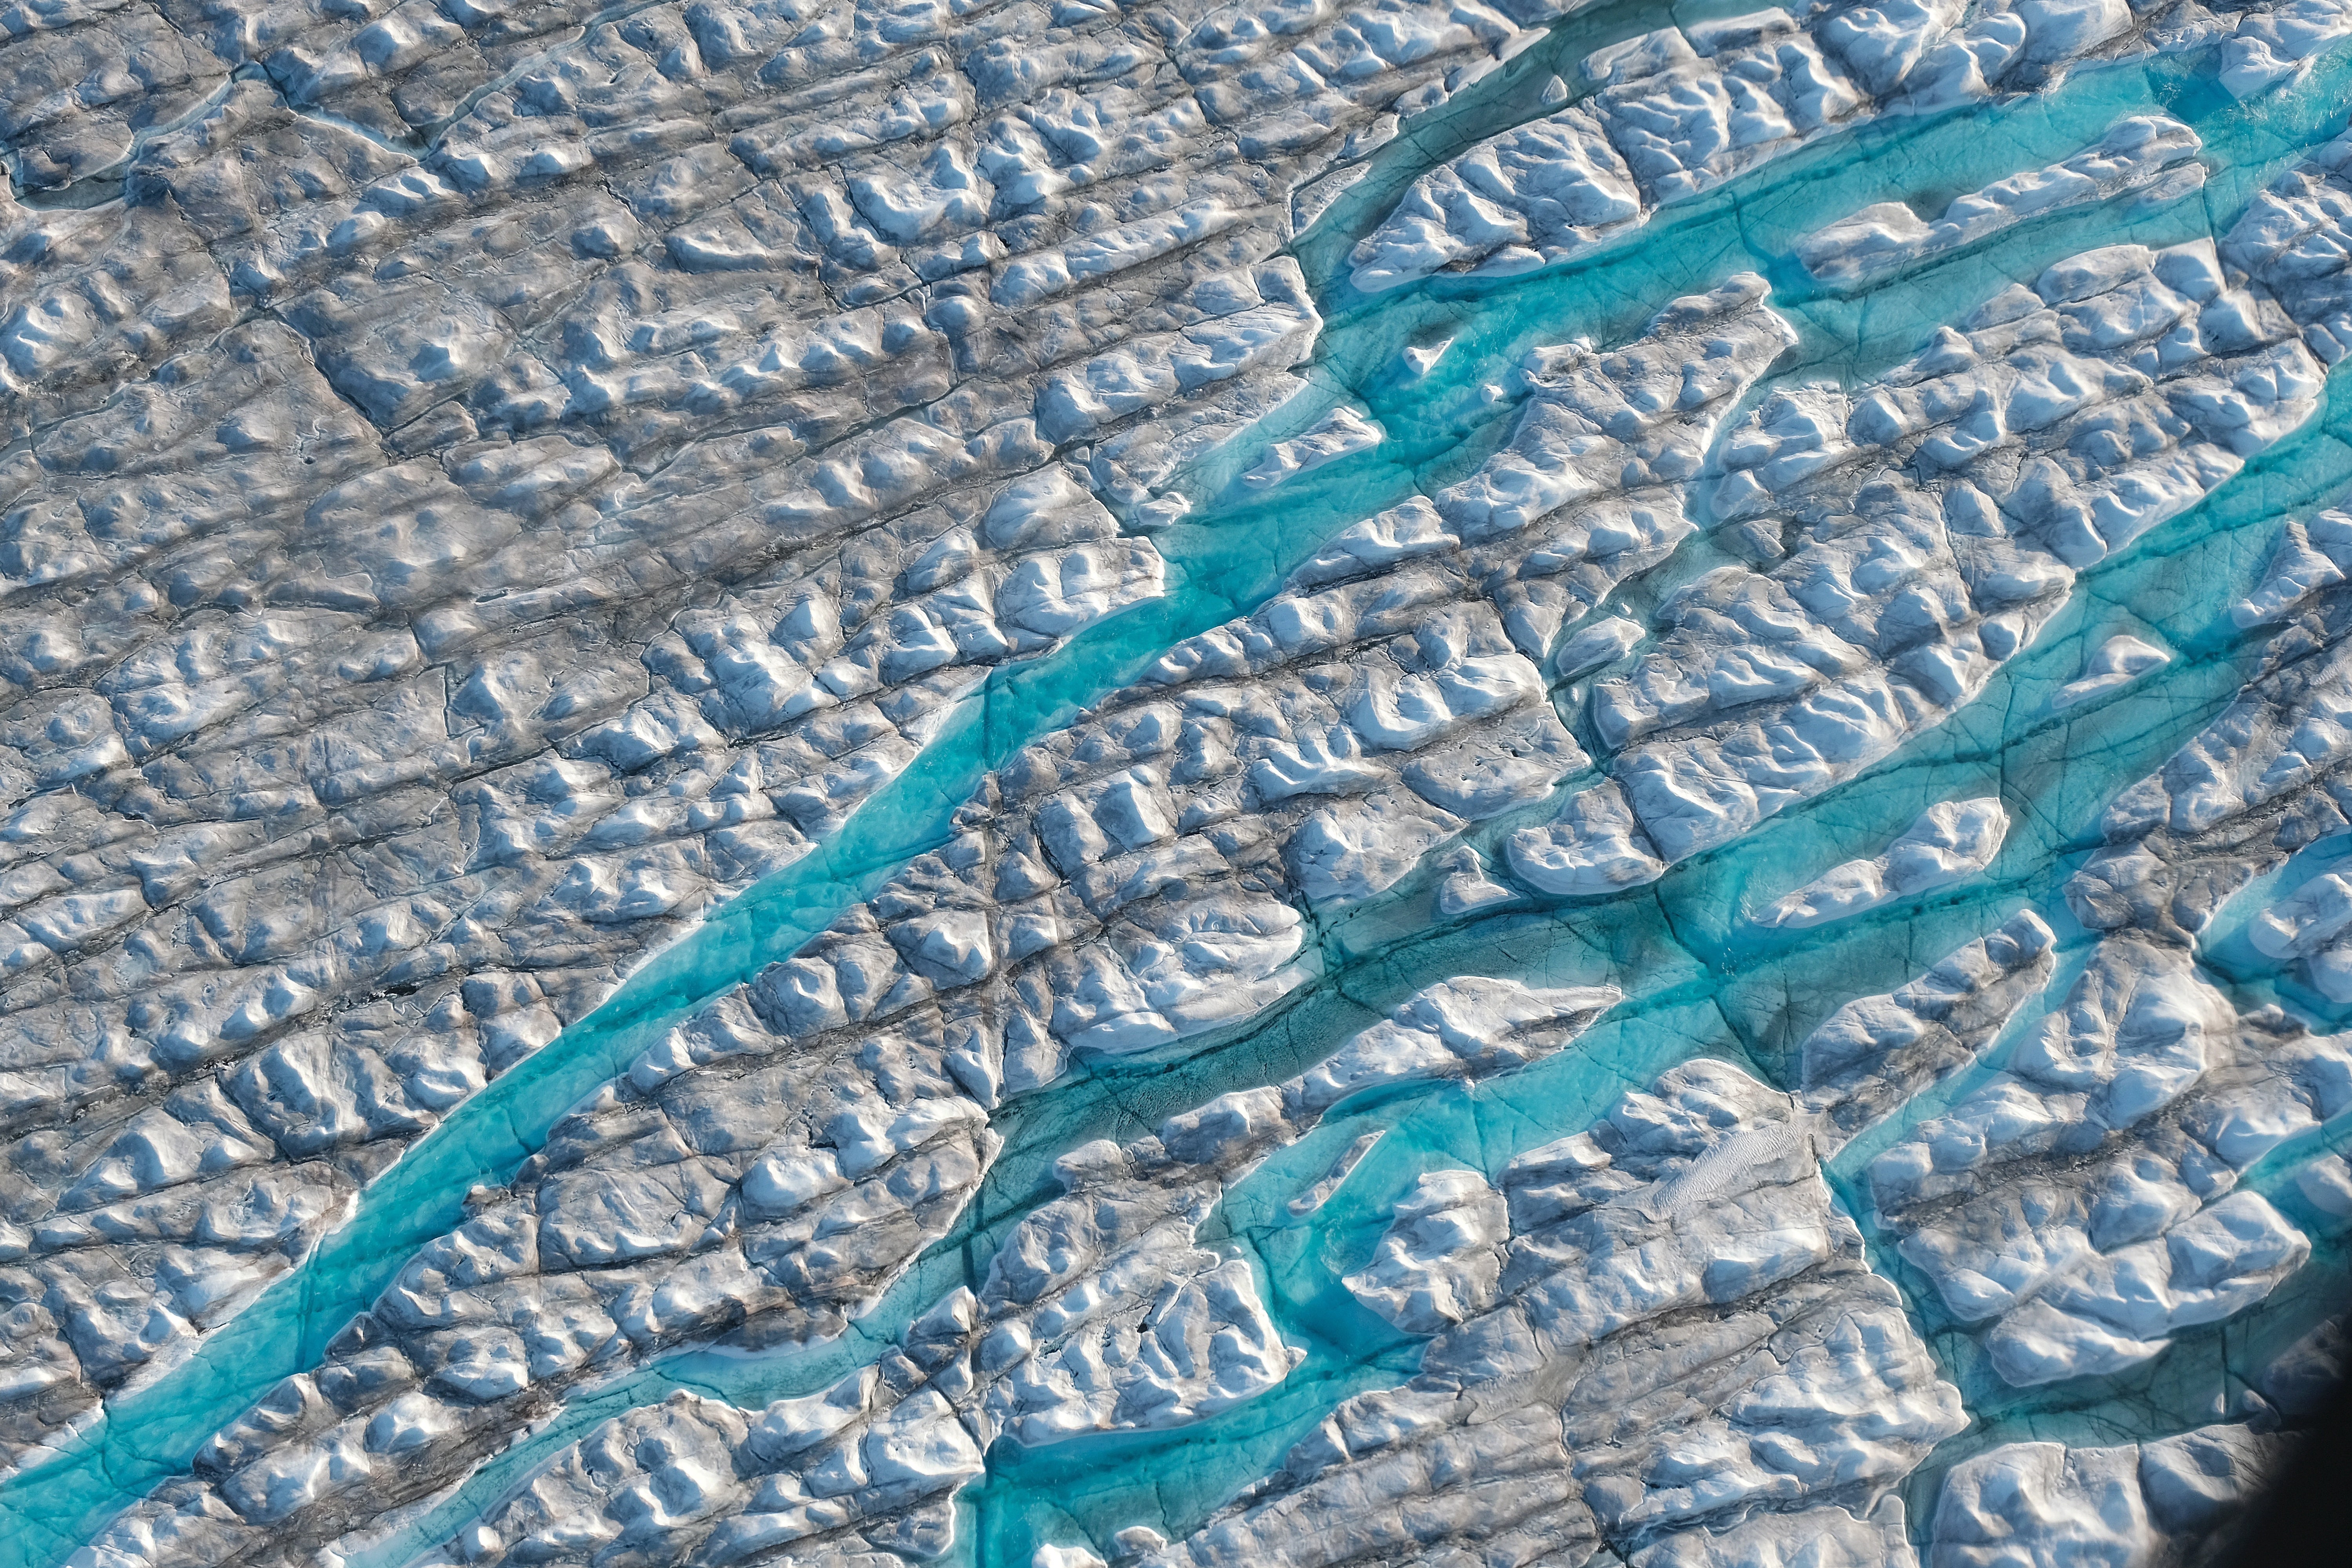 How to Save Greenland's Massive Ice Sheet